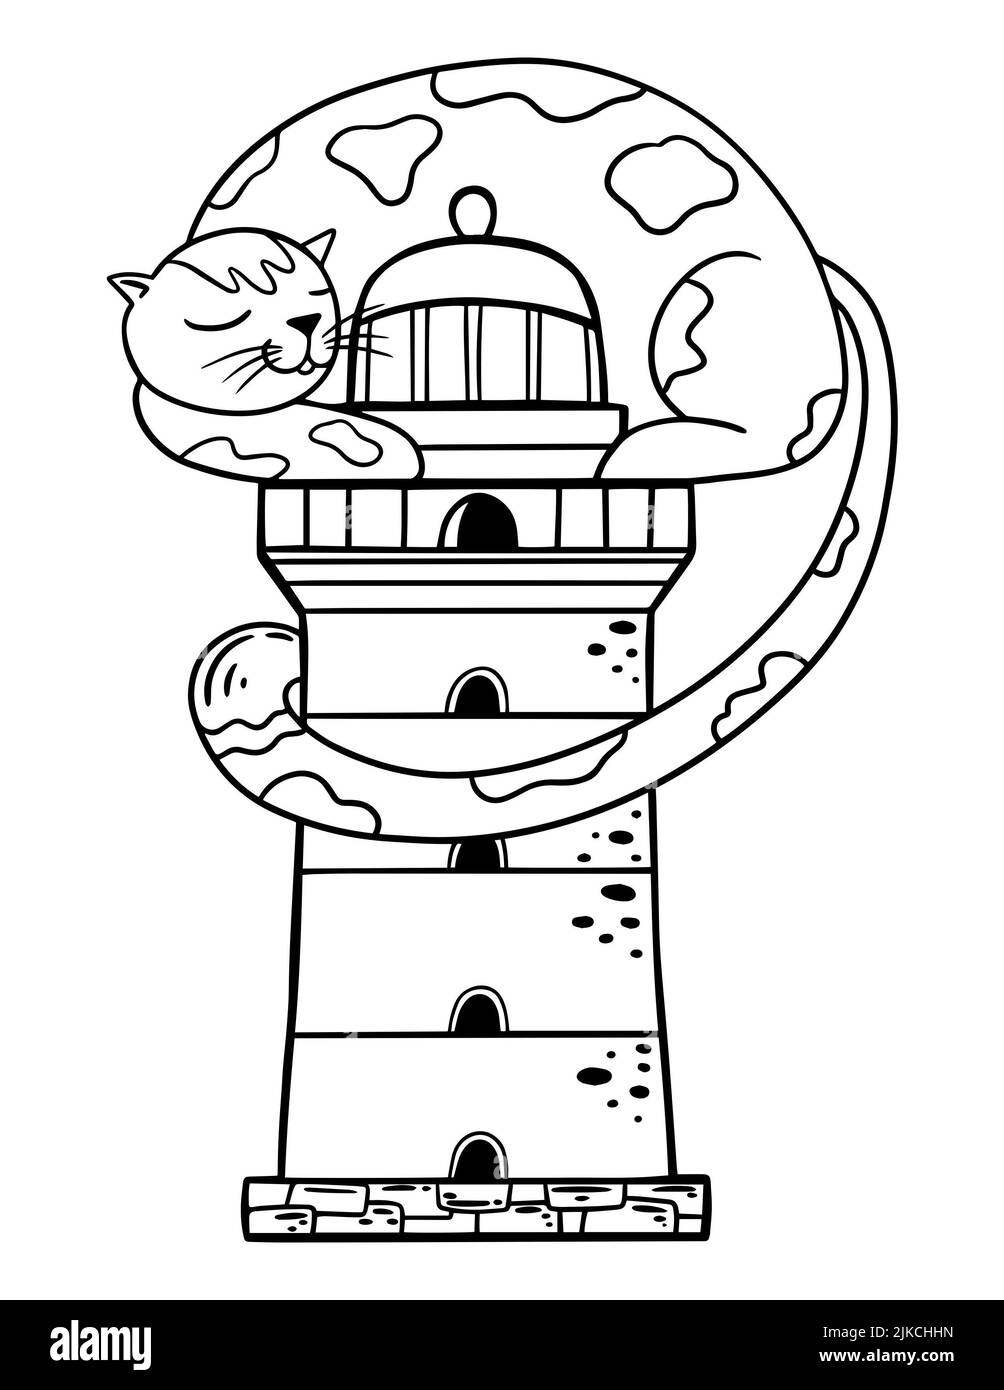 Cartoon house coloring page for kids and adults. Outline home illustration. Stock Photo